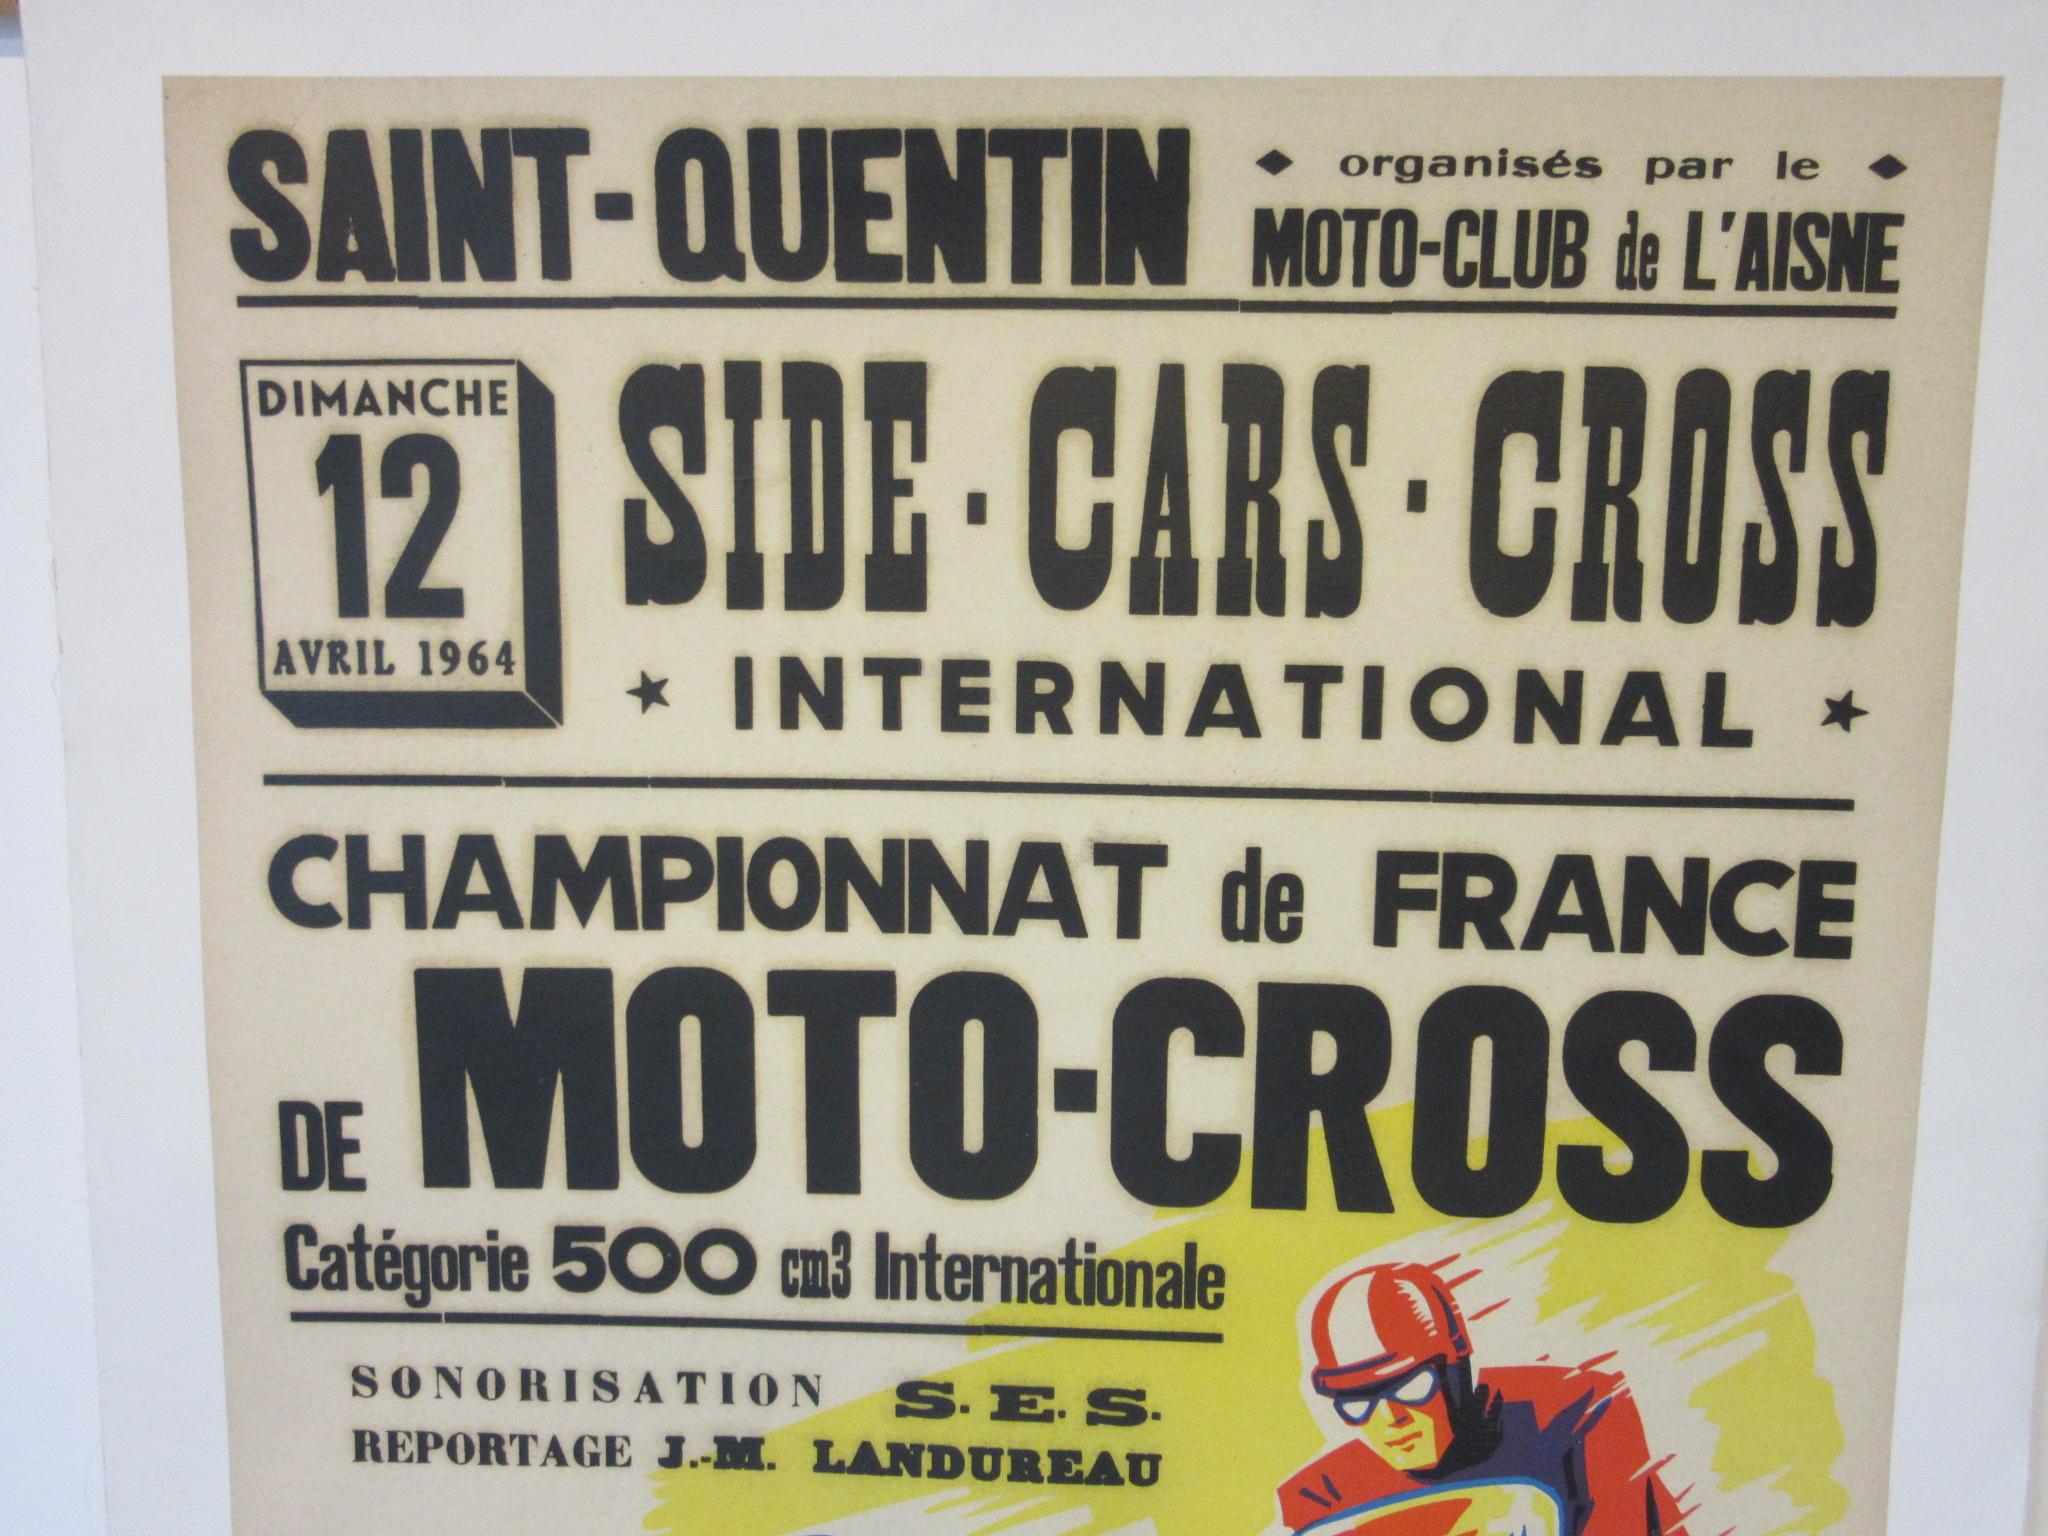 A brightly colored vintage Championnat de France Moto - Cross poster also advertising the sponsor BP Energol oil products dated April 12 1964. From a French international side car and moto cross championship race displaying both classes and other